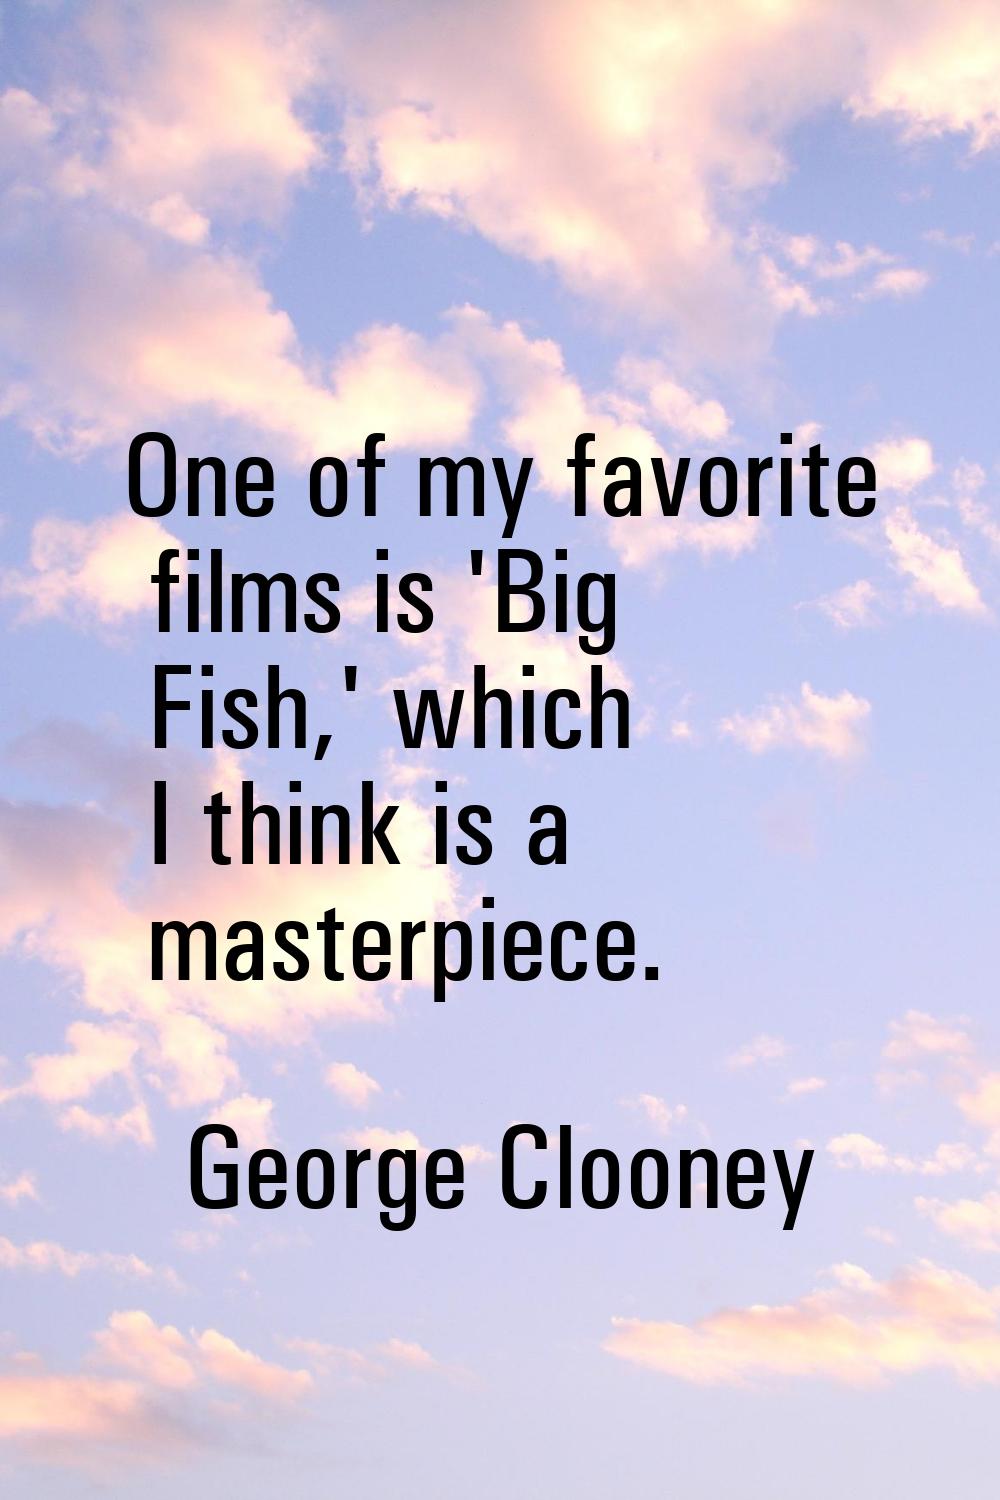 One of my favorite films is 'Big Fish,' which I think is a masterpiece.